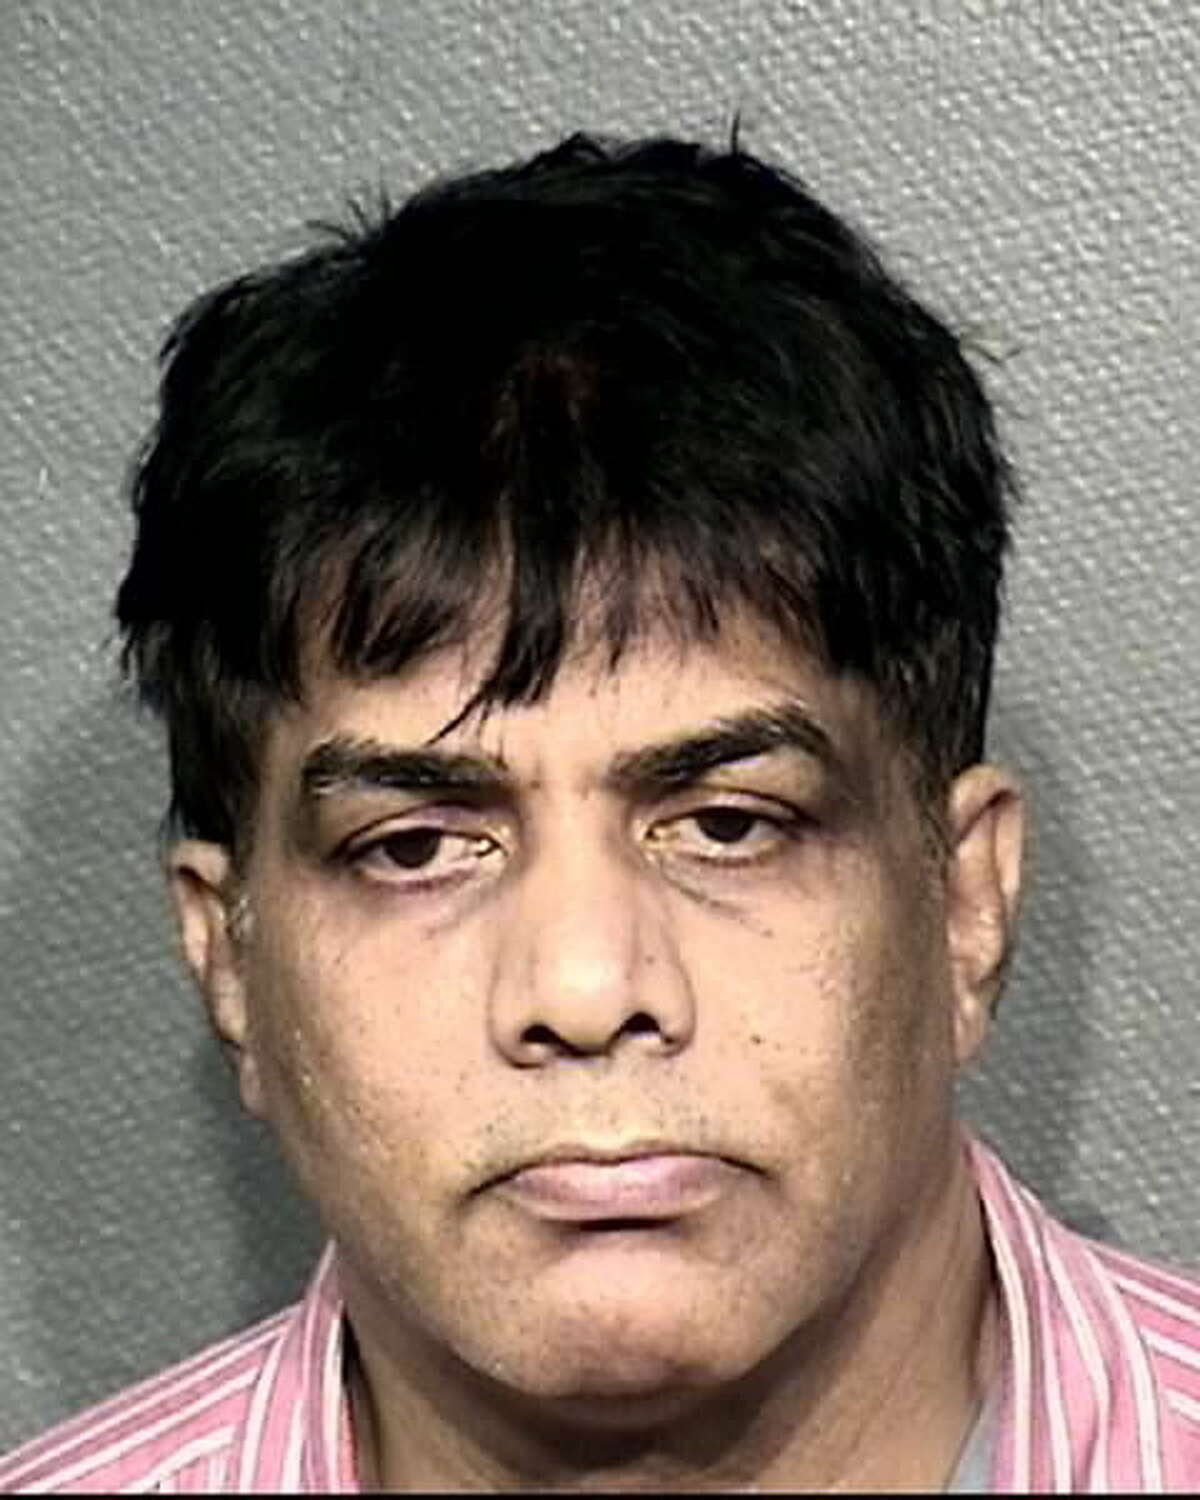 Abdullah Shah was one of 69 suspects arrested by the Houston Police Department and charged with either compelling prostitution or soliciting prostitution during the months of June and July 2018.